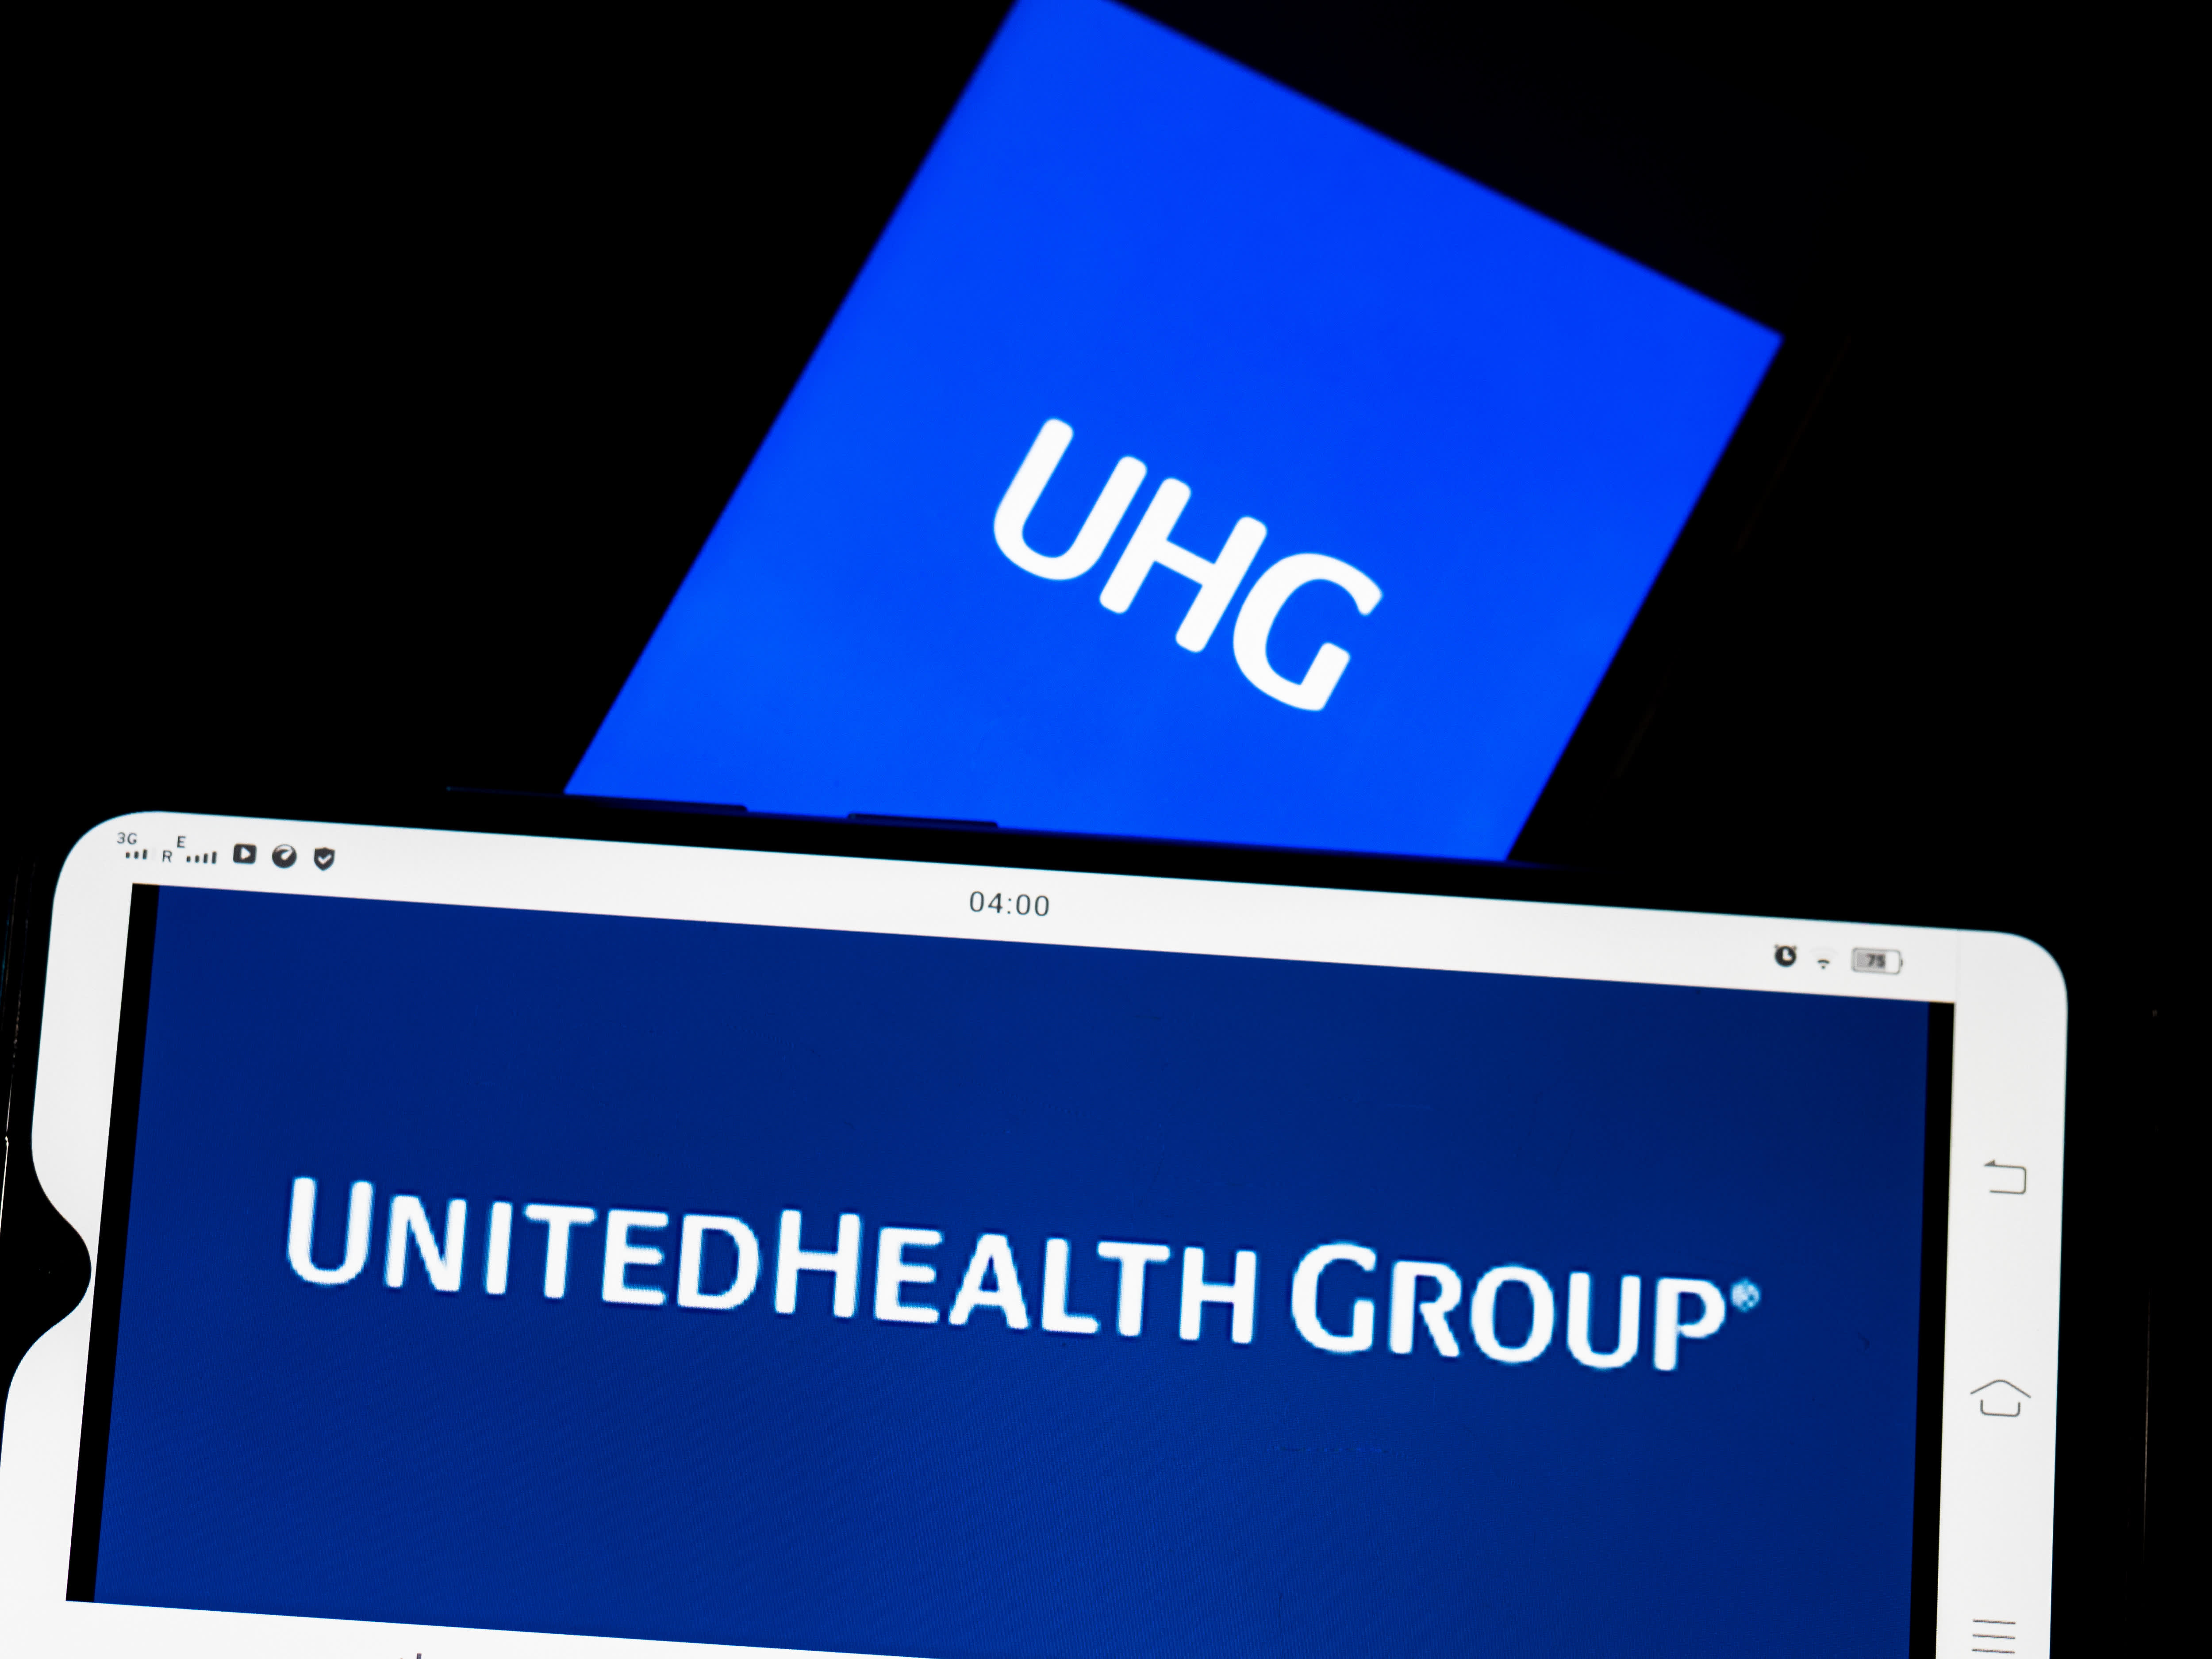 UnitedHealth paid ransom to bad actors, says patient data was compromised